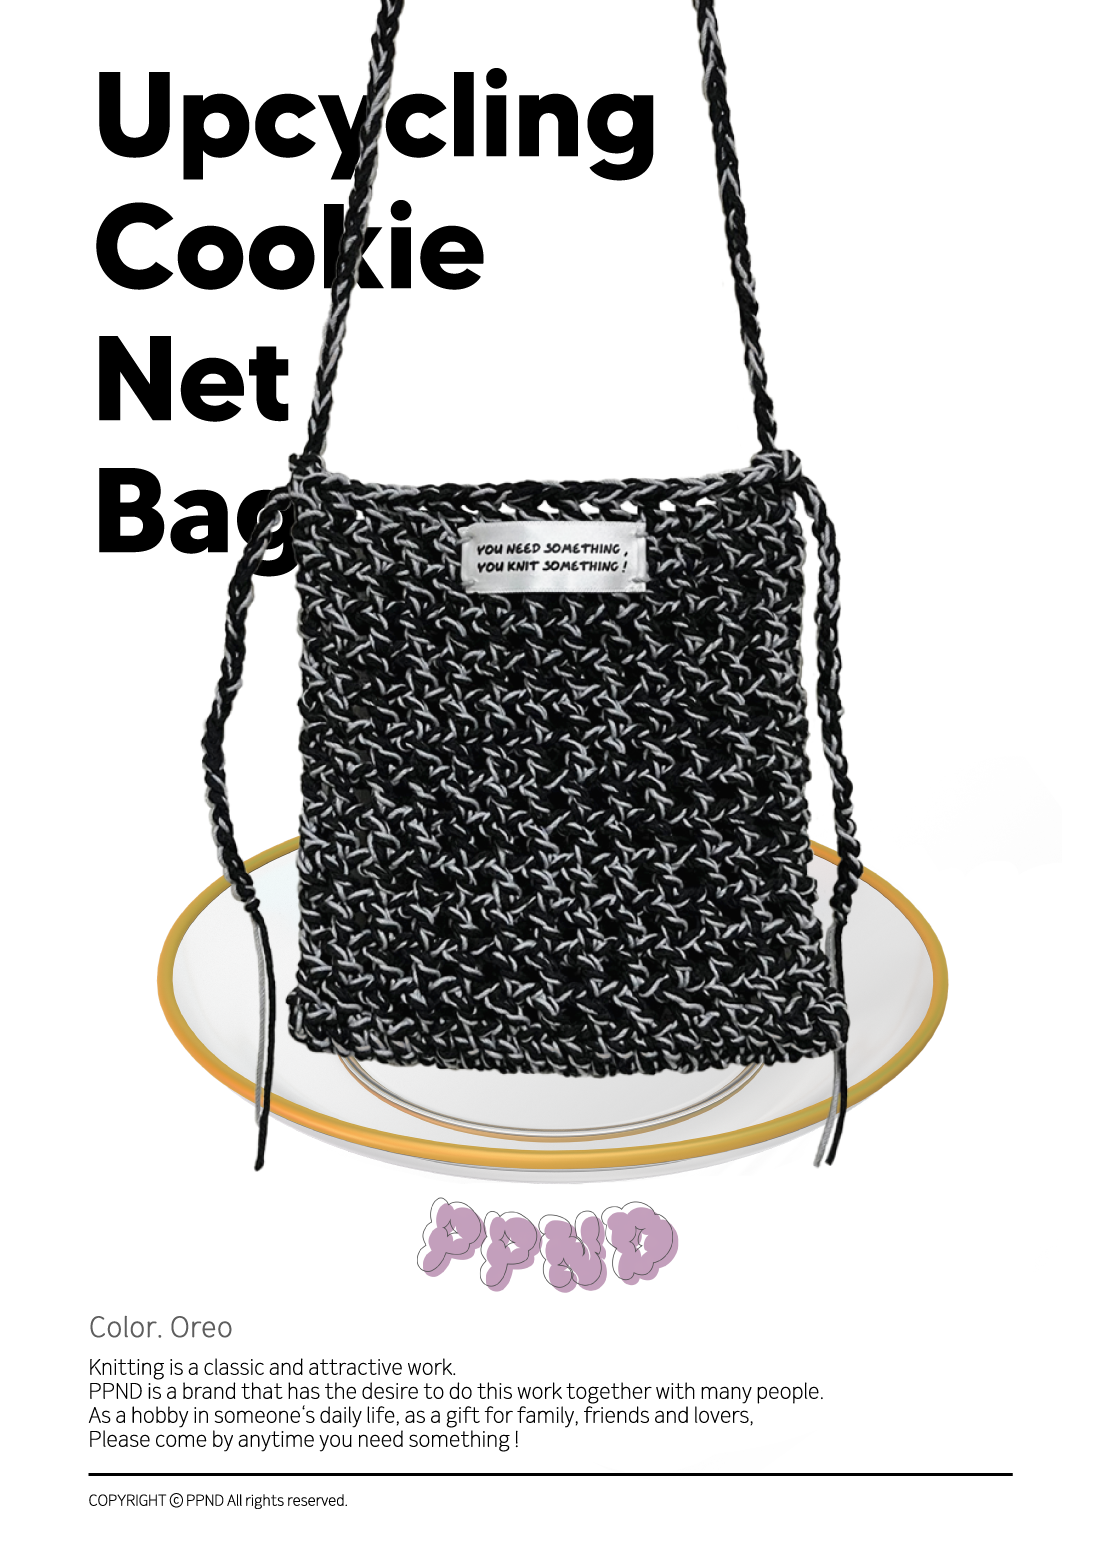 Upcycling Cookie Net Bag